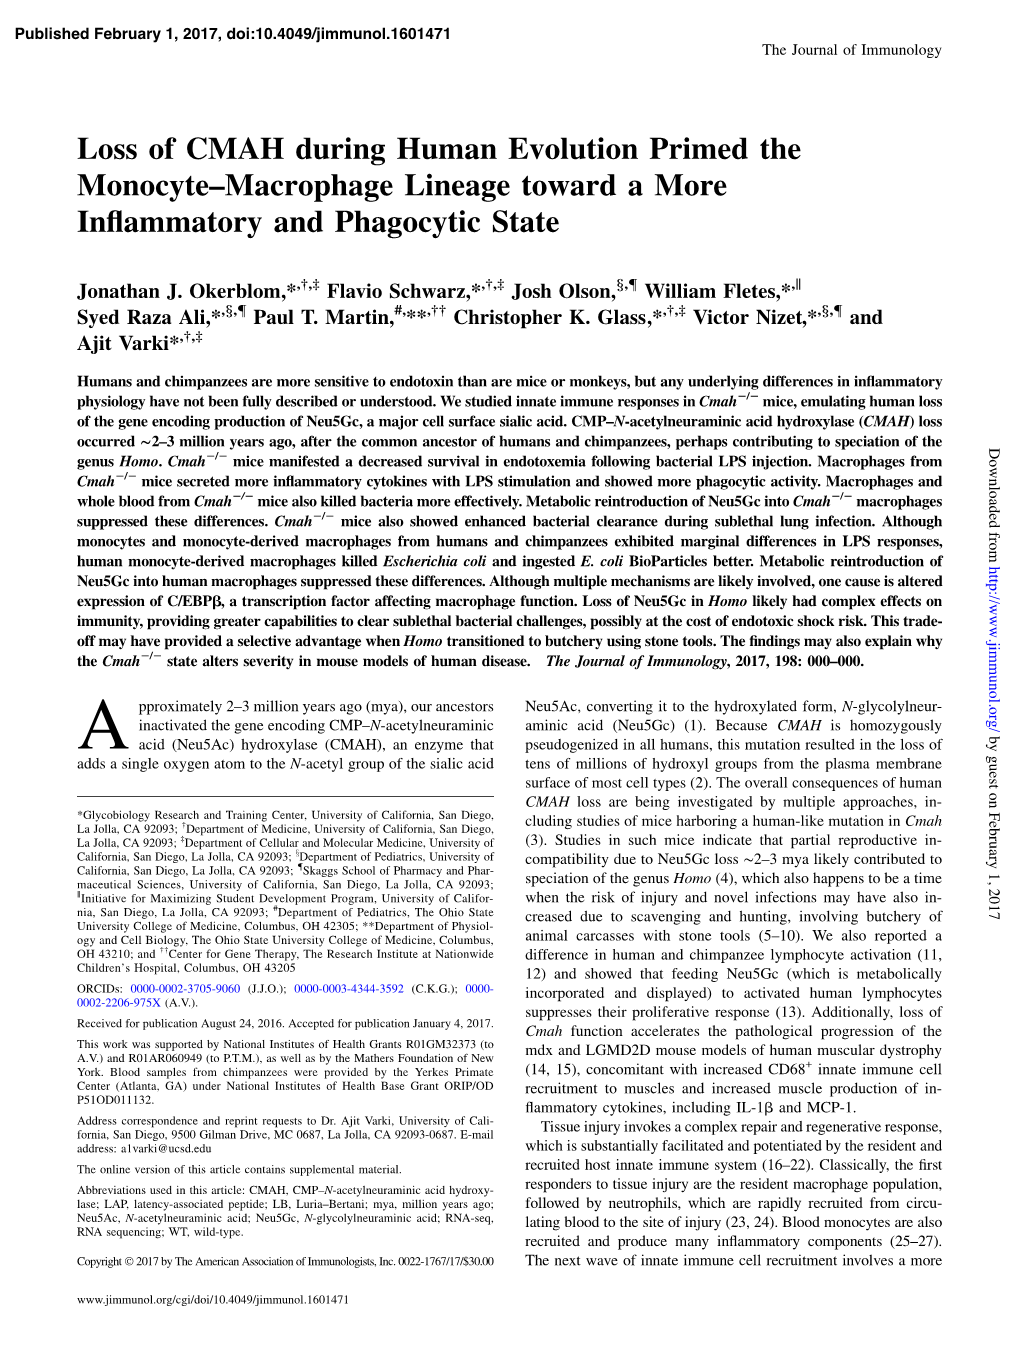 Loss of CMAH During Human Evolution Primed the Monocyte–Macrophage Lineage Toward a More Inﬂammatory and Phagocytic State